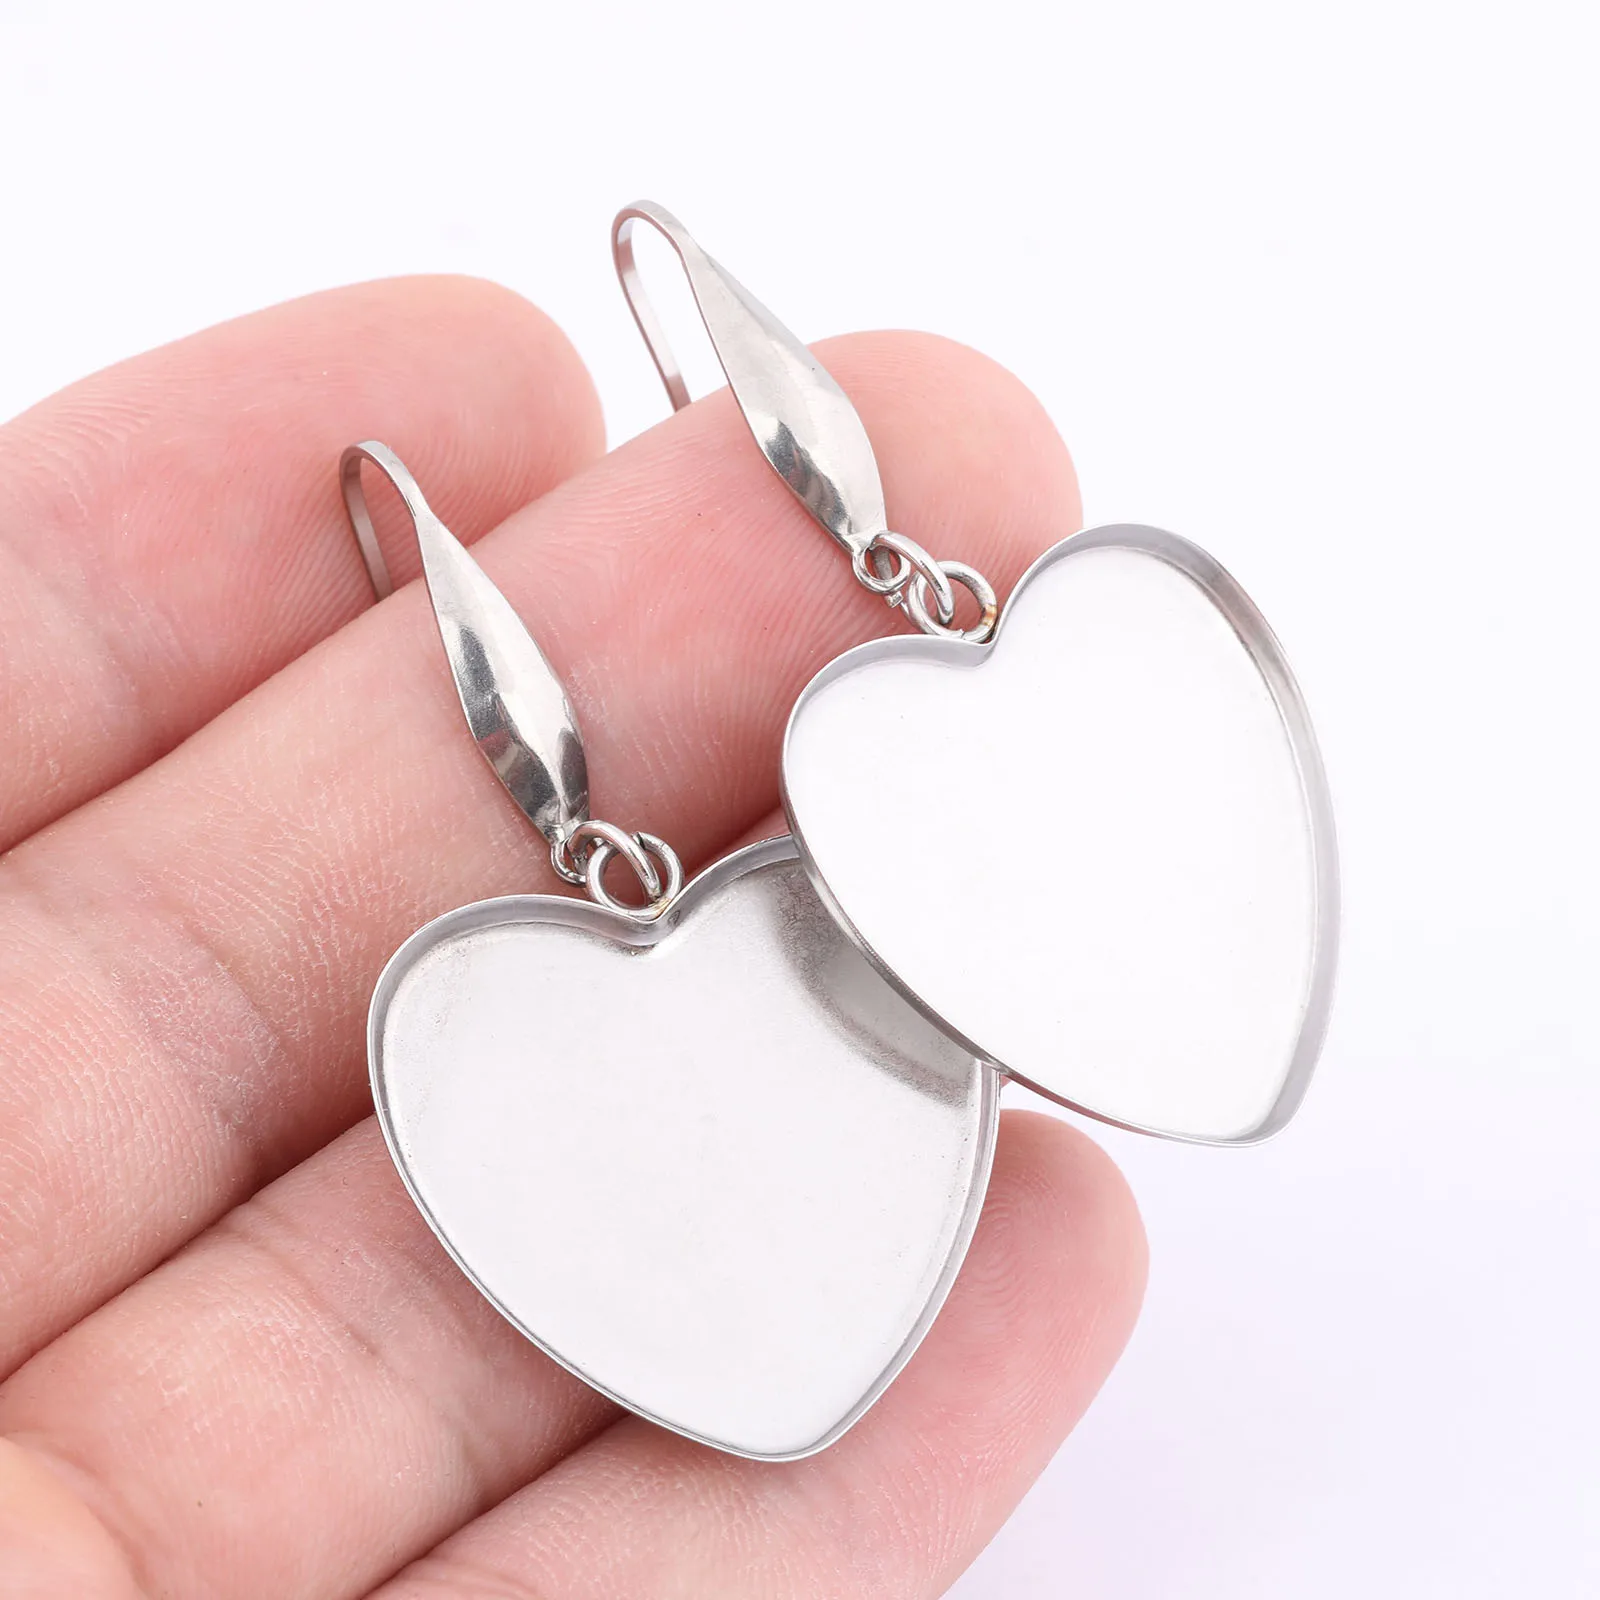 

10pcs Stainless Steel Fit 25mm Heart Cabochon Earring Base Setting Blanks Diy Ear Wire Hooks Findings For Jewelry Making